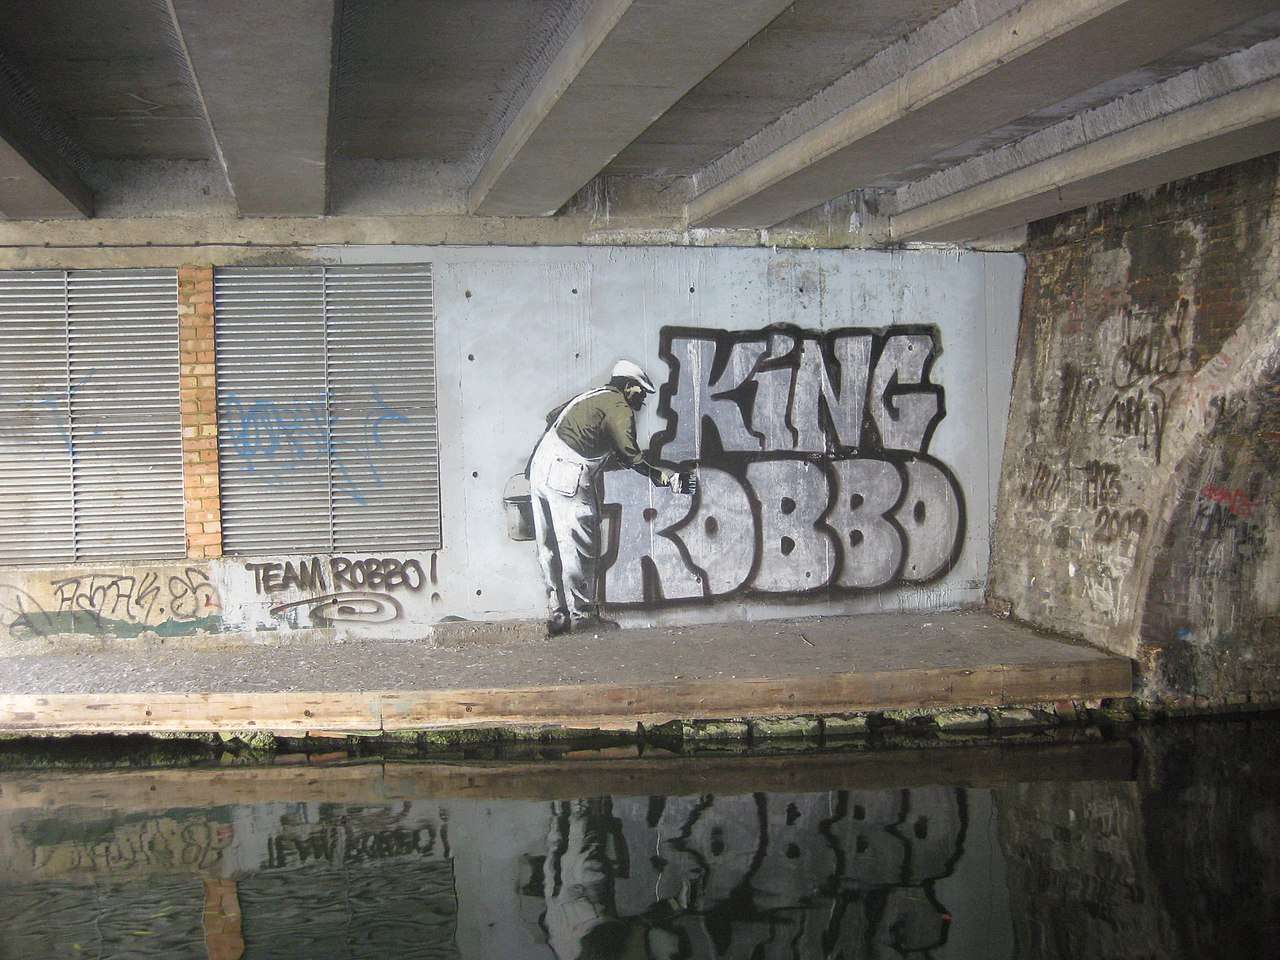 The location of the damaged 1985 graffiti by Robbo in Camden, London allegedly painted over by Banksy and subsequently painted over by Robbo in retaliation.